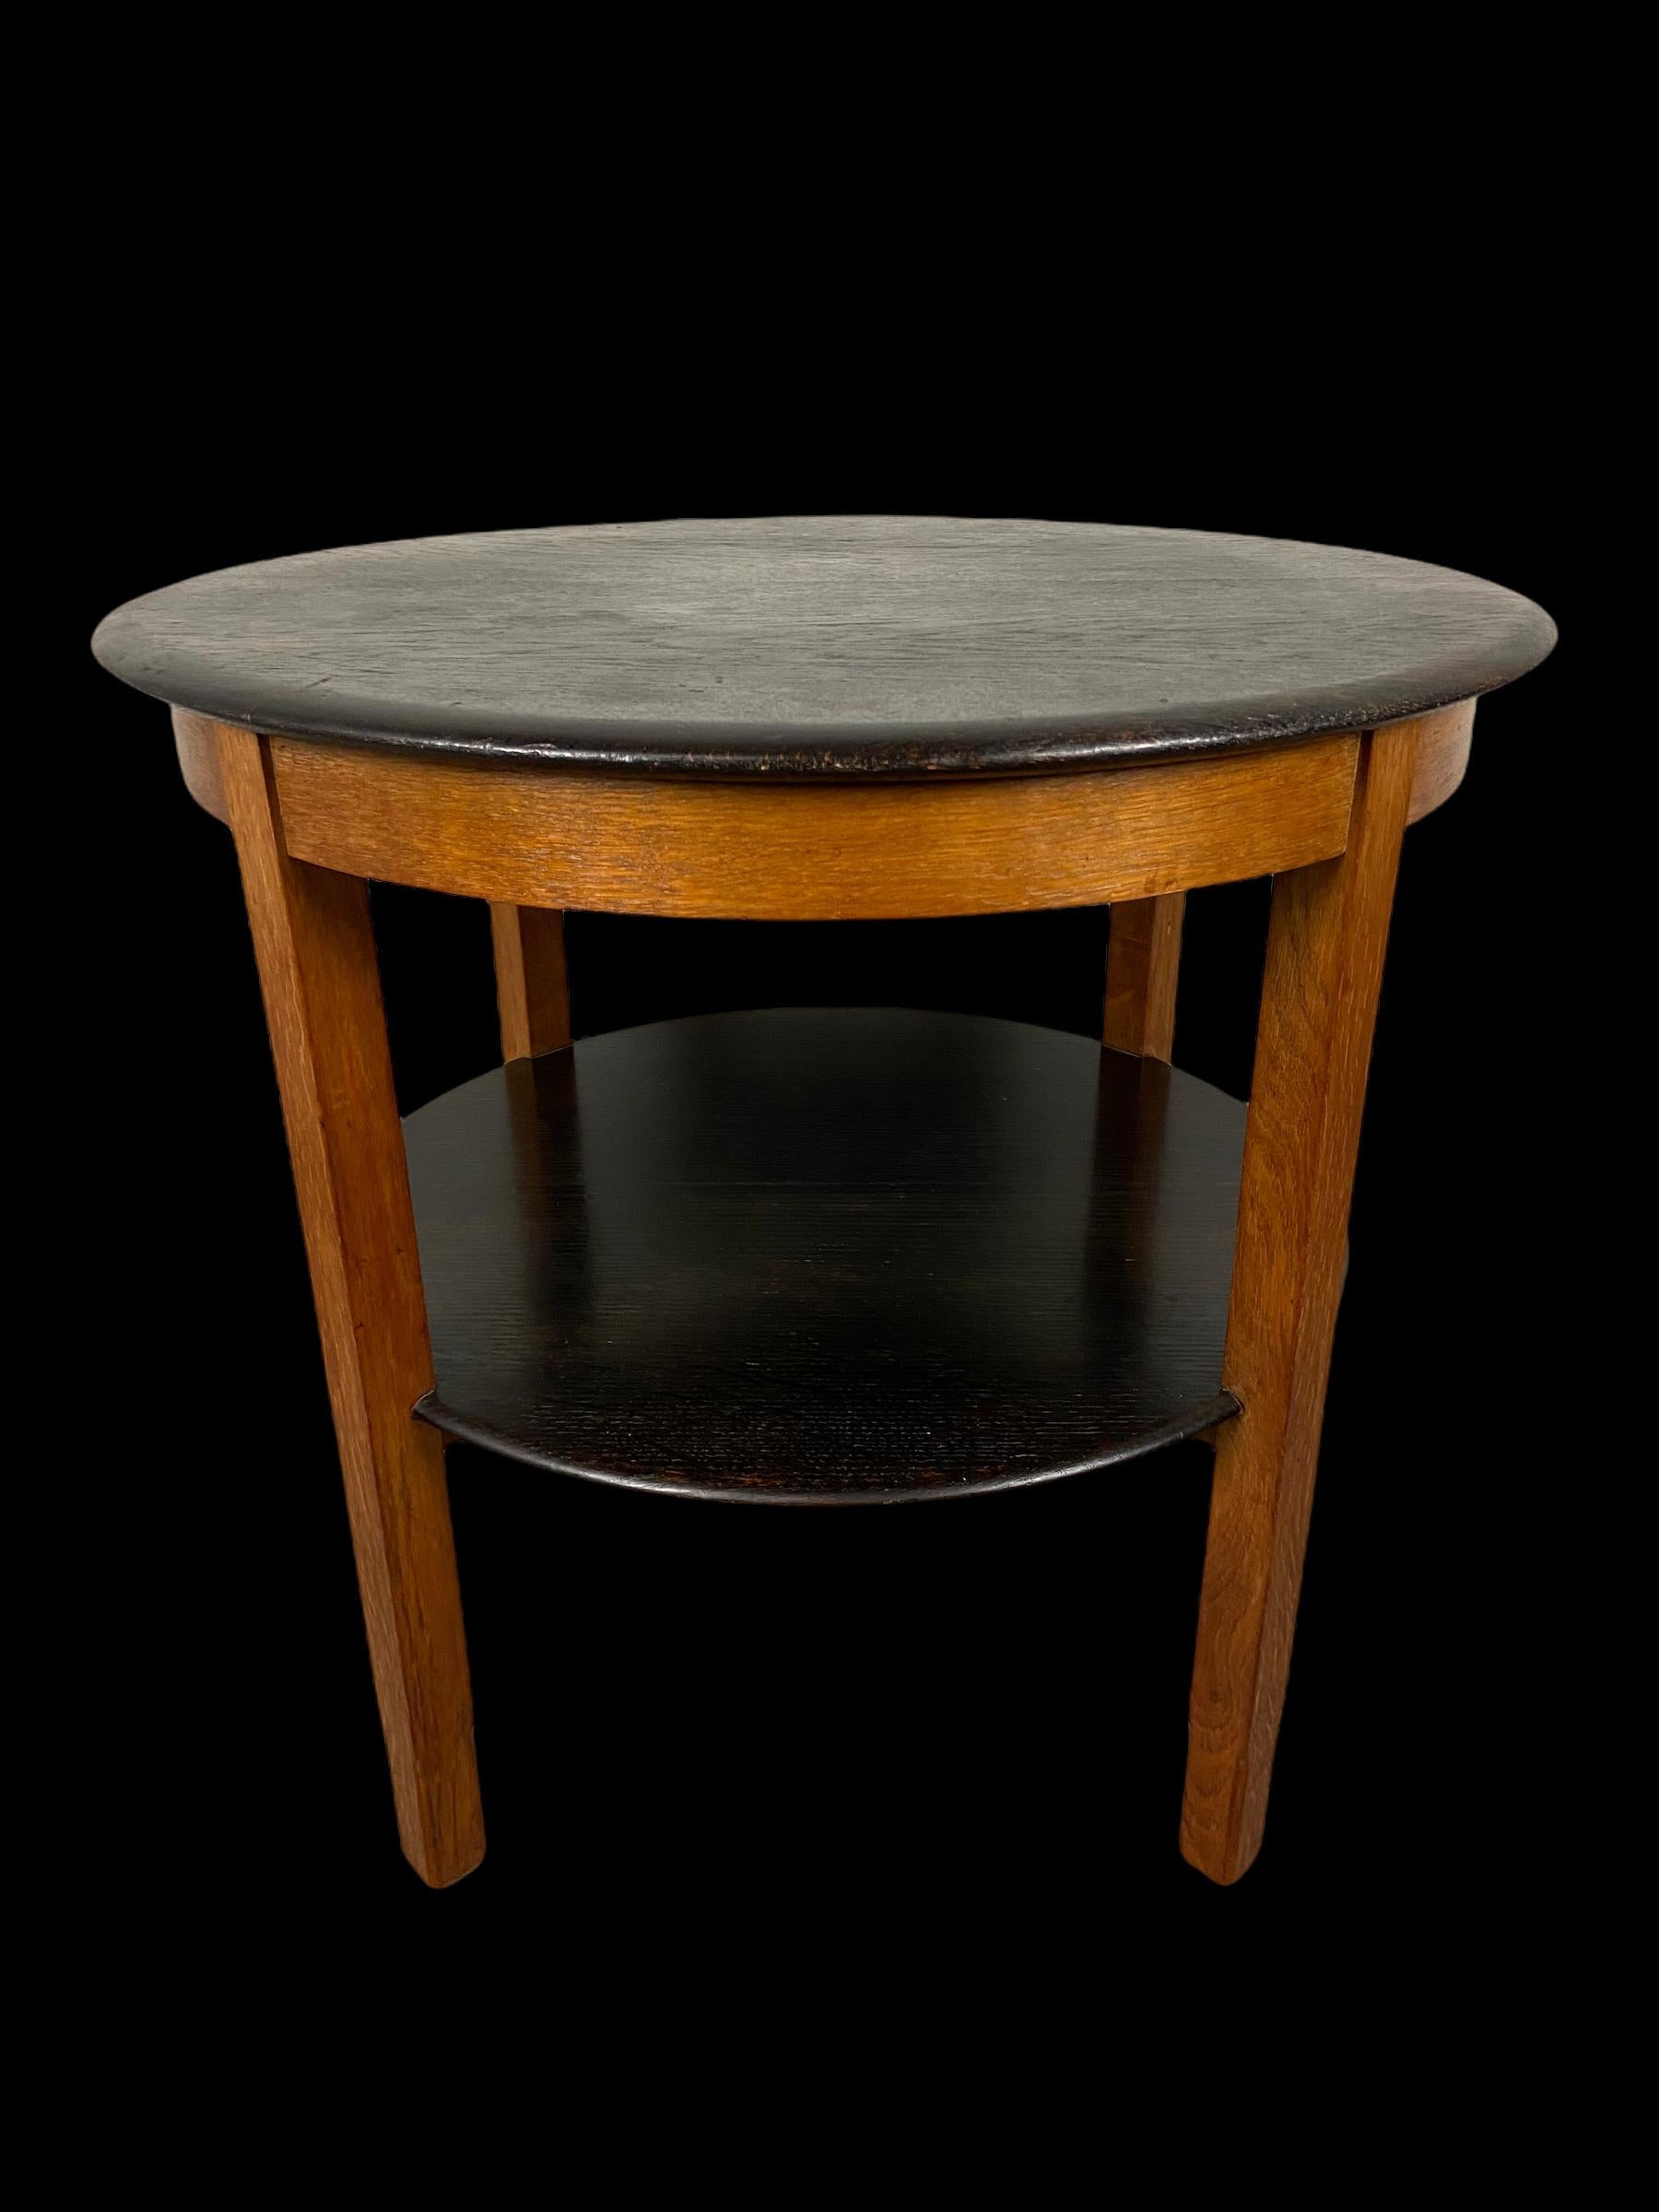 Hague School coffee table made of oak by the firm ” LOV Oosterbeek” around 1920. The furniture factory L.O.V Oosterbeek(Labor Omnia Vincit; Work conquers all)was established in 1910 and was important in the history of Dutch applied art. Dutch design